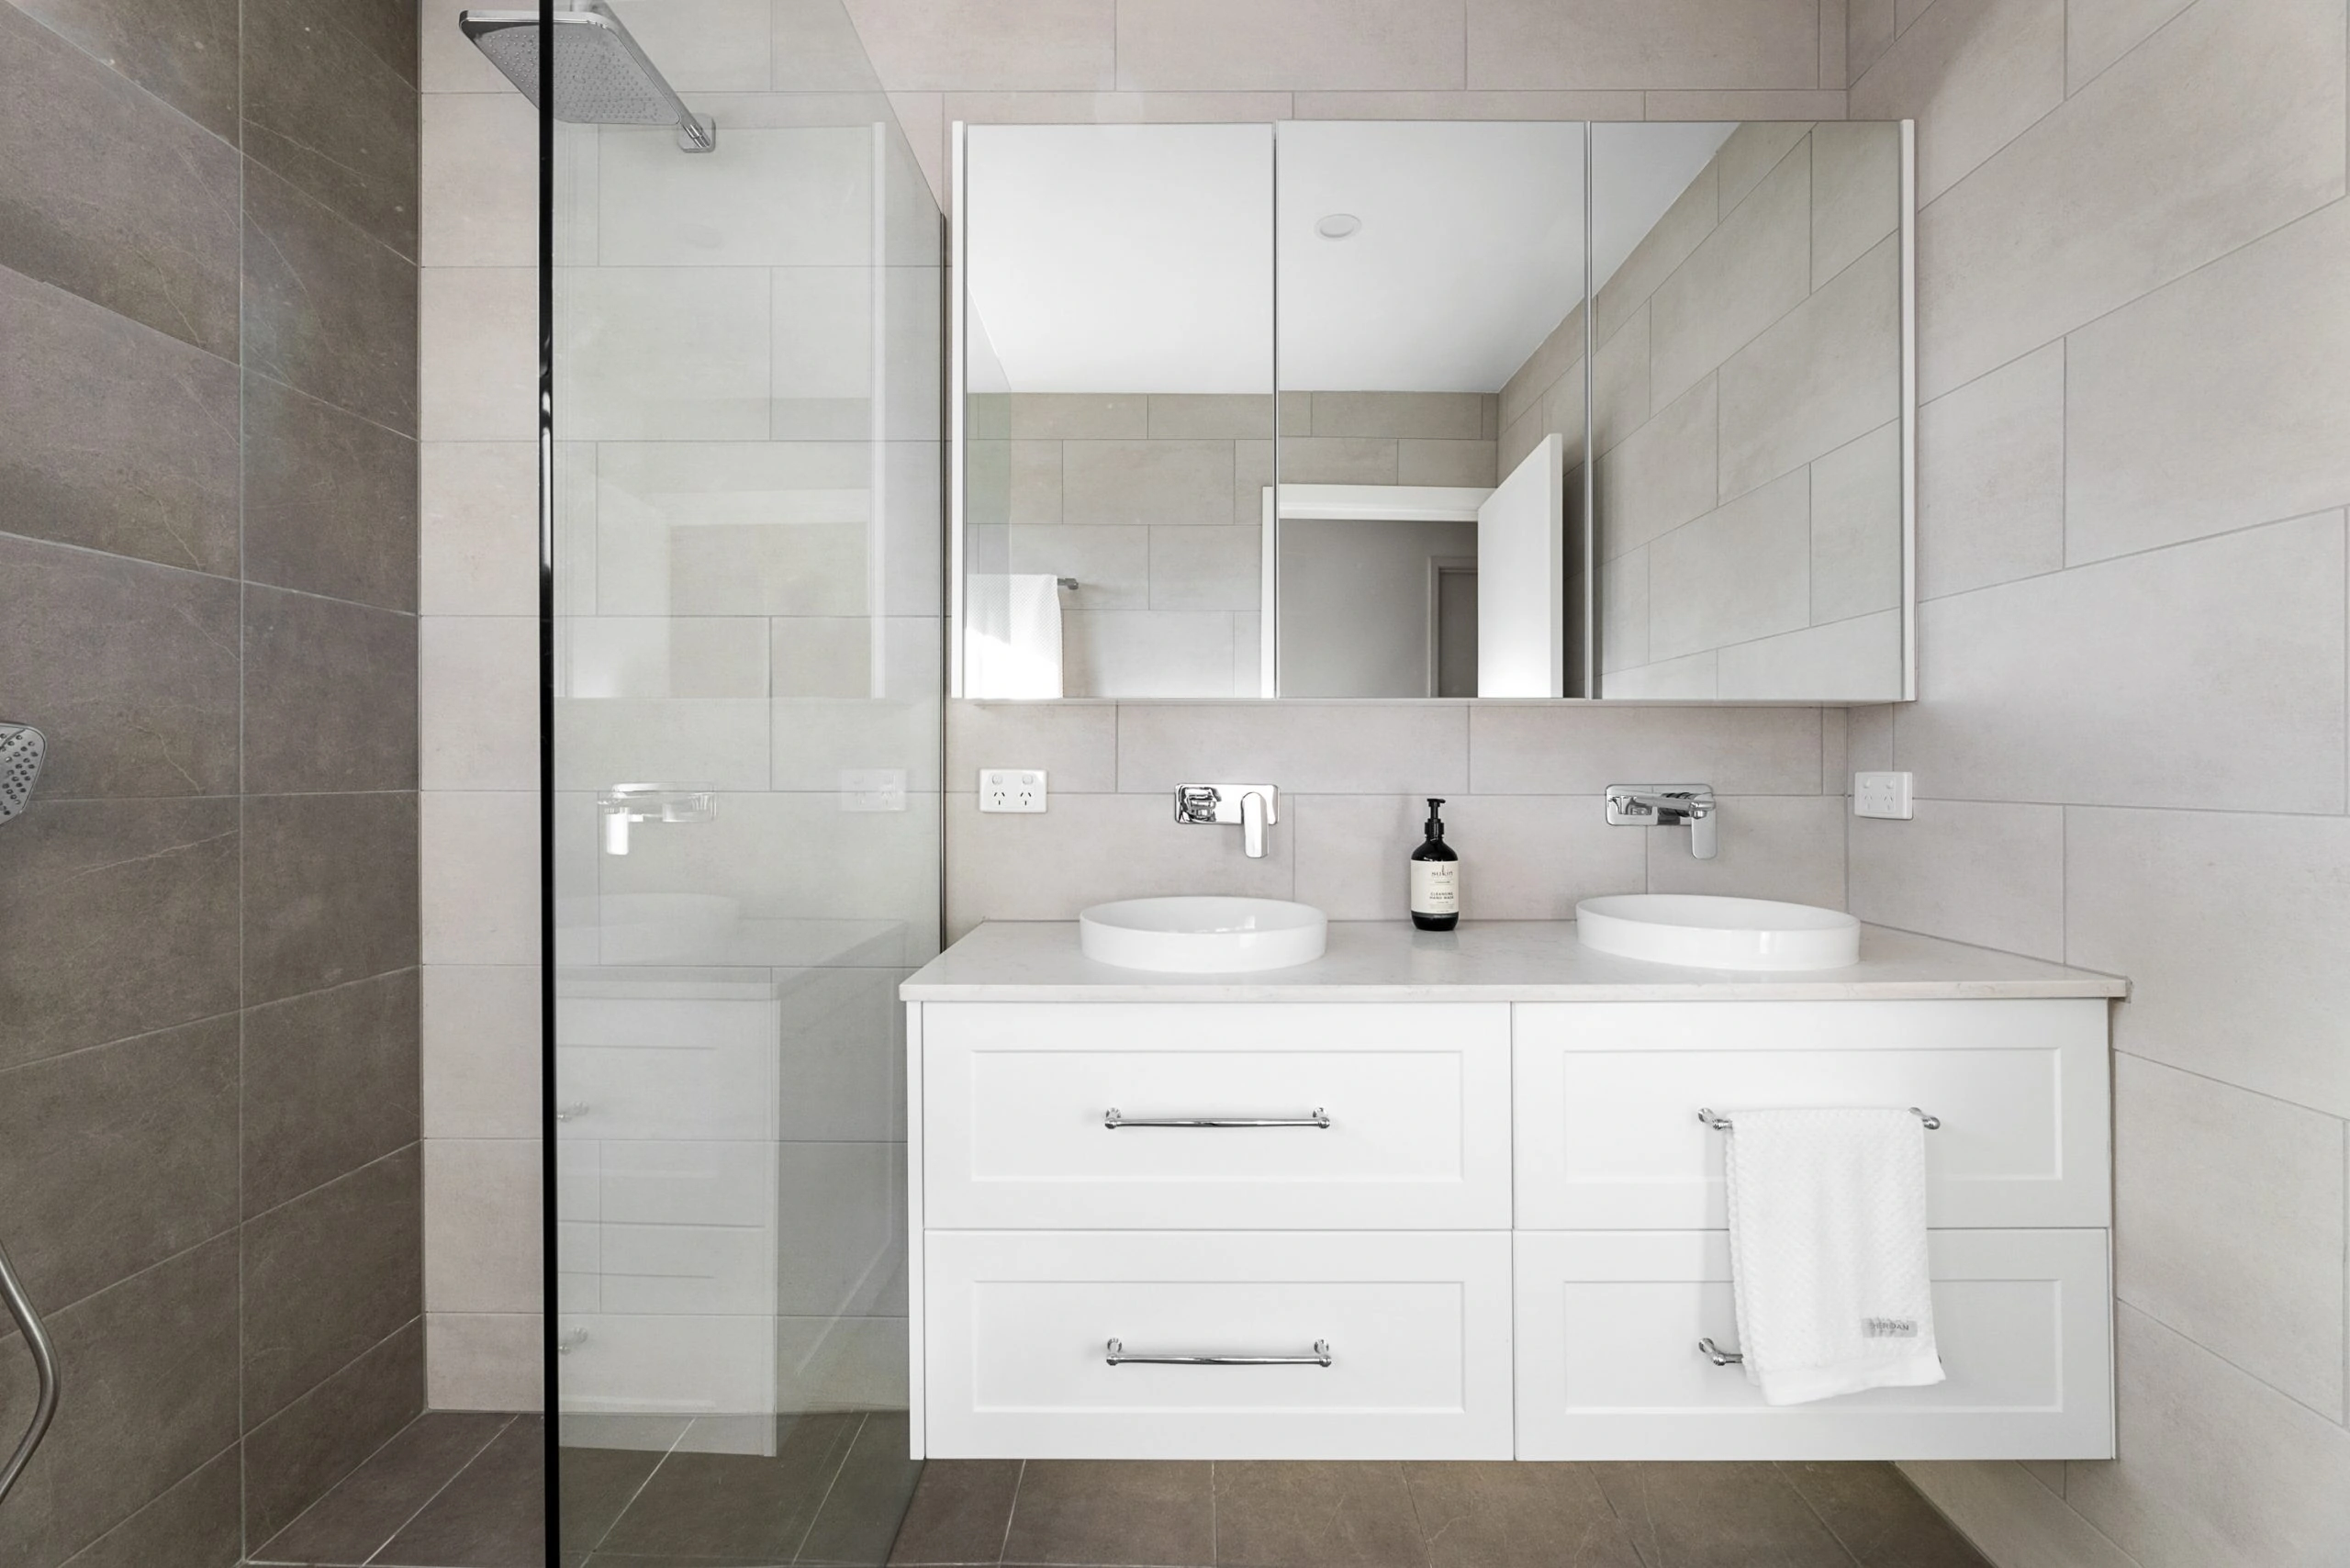 White vanity unit with a mirrored bathroom wall unit above